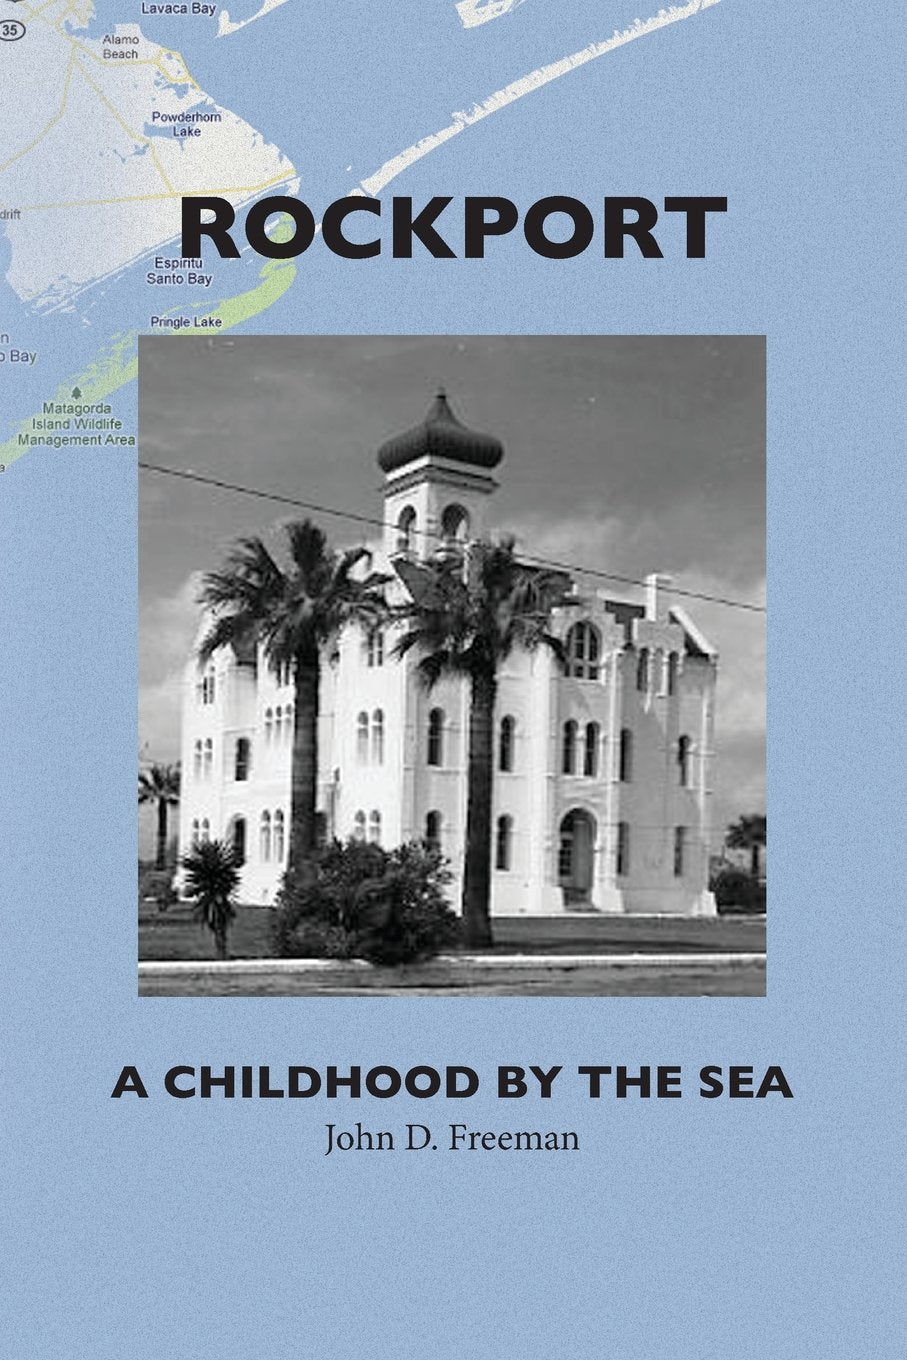 Rockport: A Childhood by the Sea